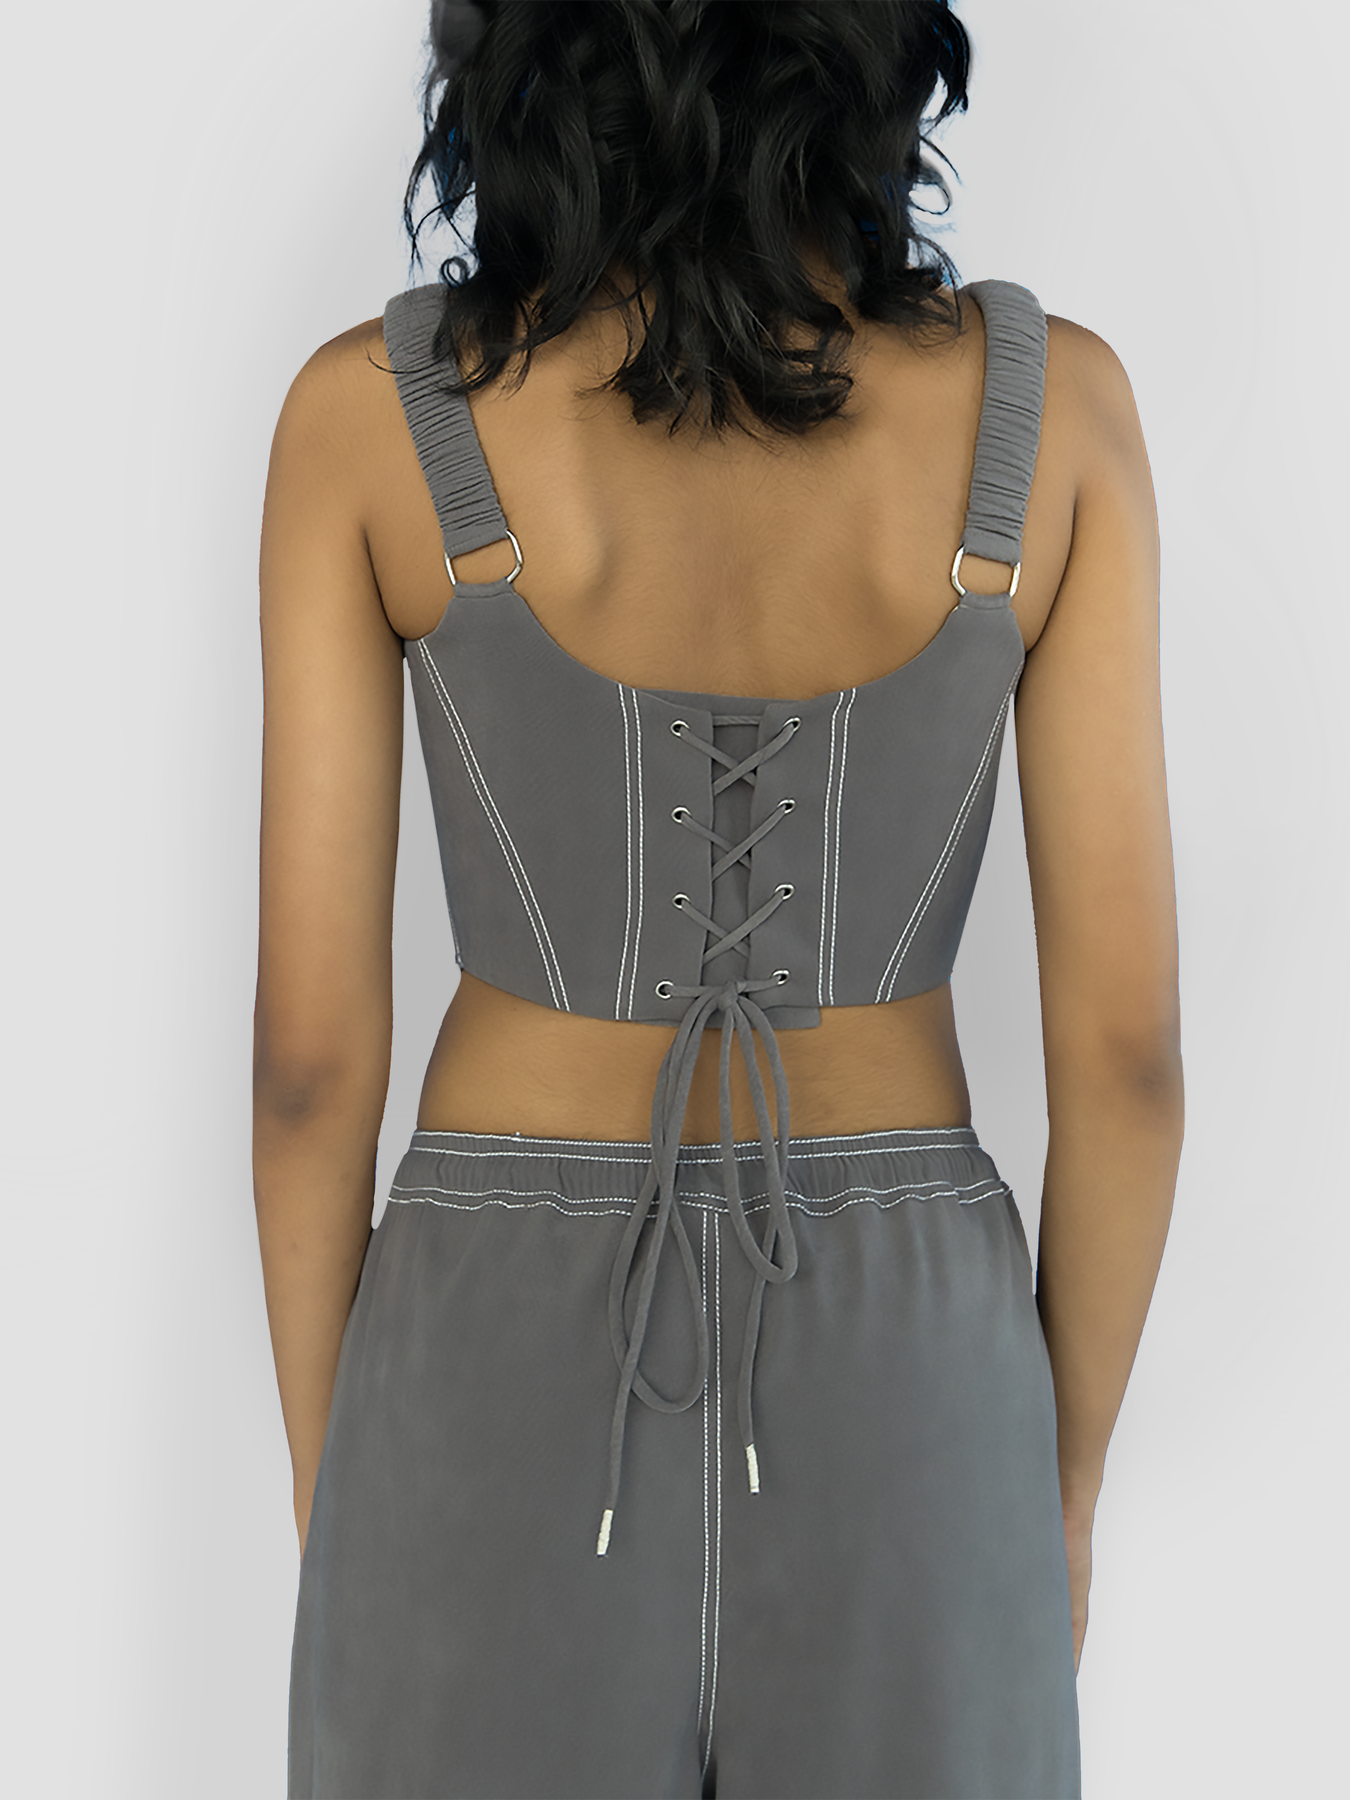 Thumbnail preview #1 for PATTHAR CORSET CO-ORD